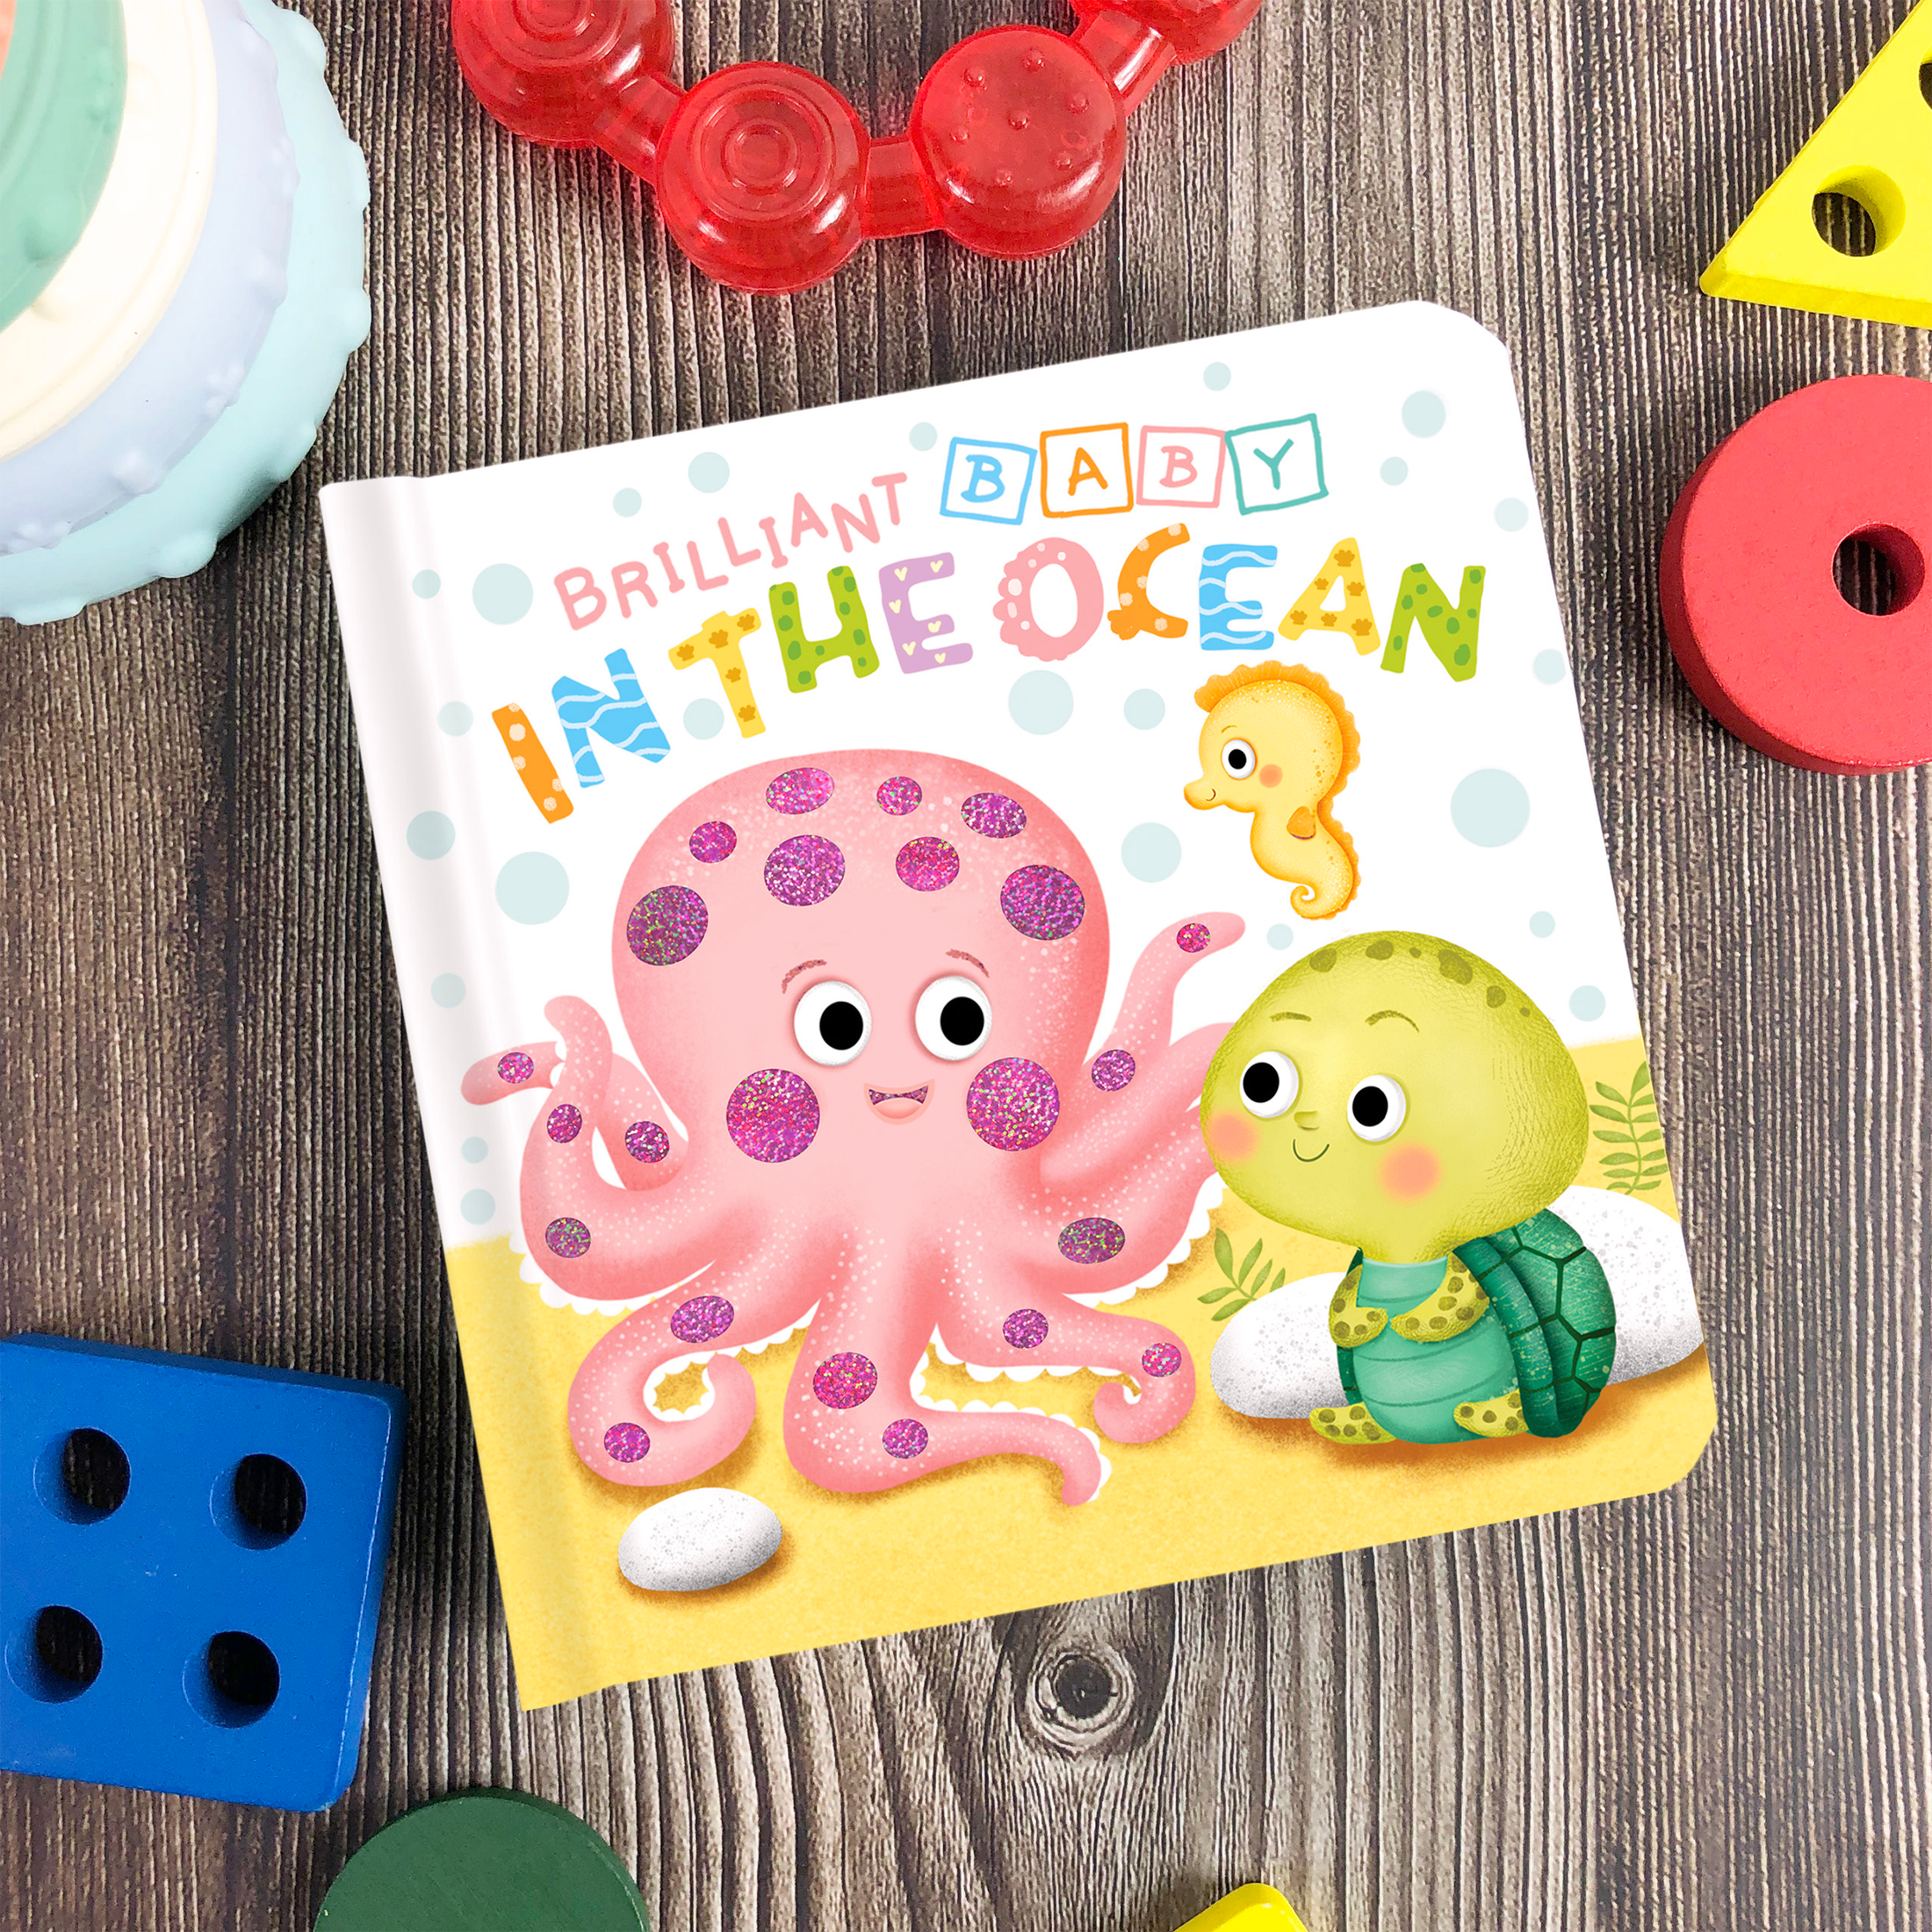 Board Book: Brilliant Baby: In the Ocean  - Children's Touch and Feel and Learn Sensory Book